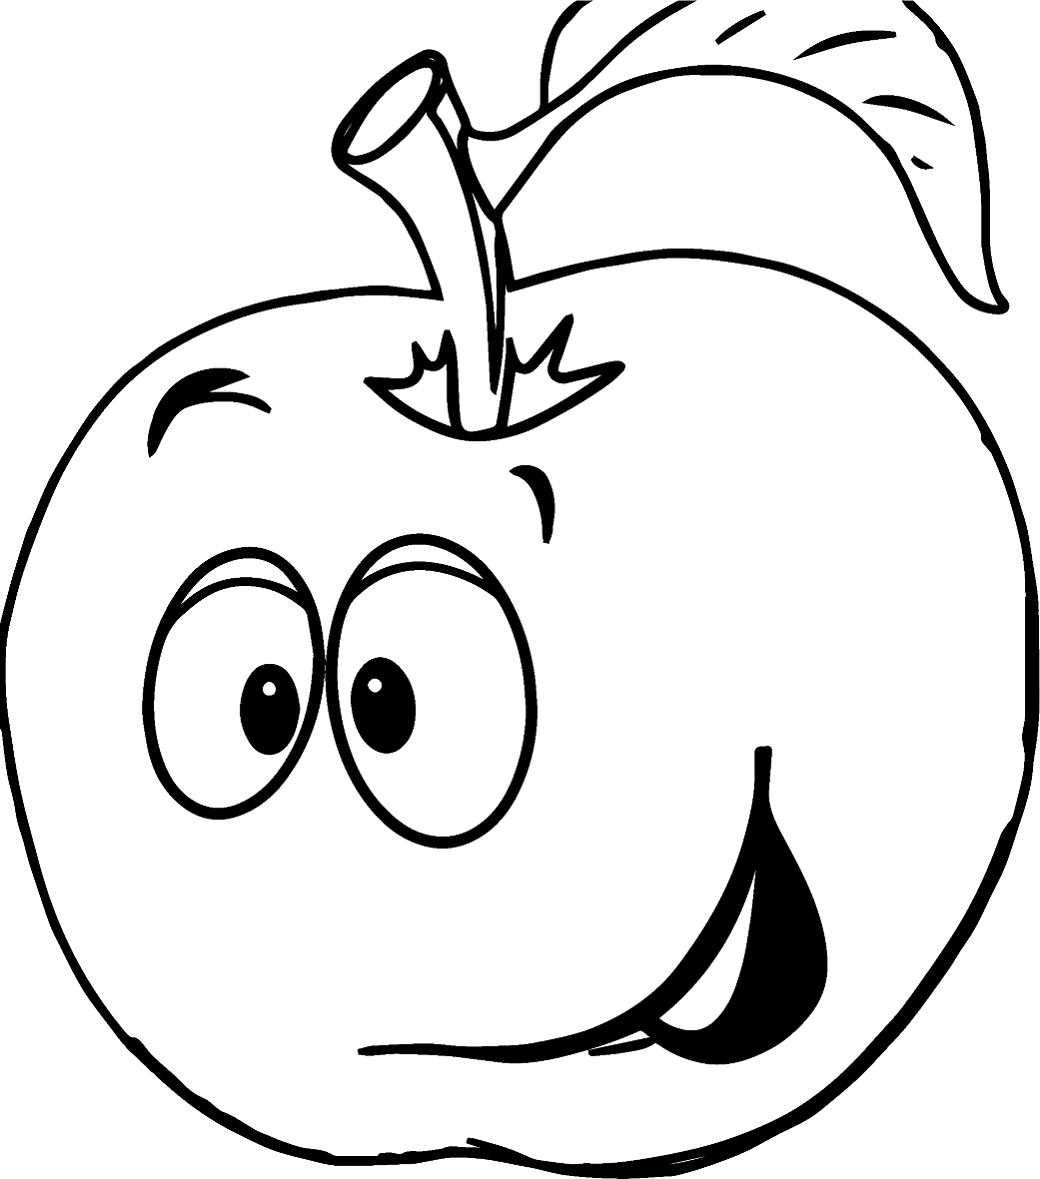 Fruit Cartoon Apple Coloring Pages